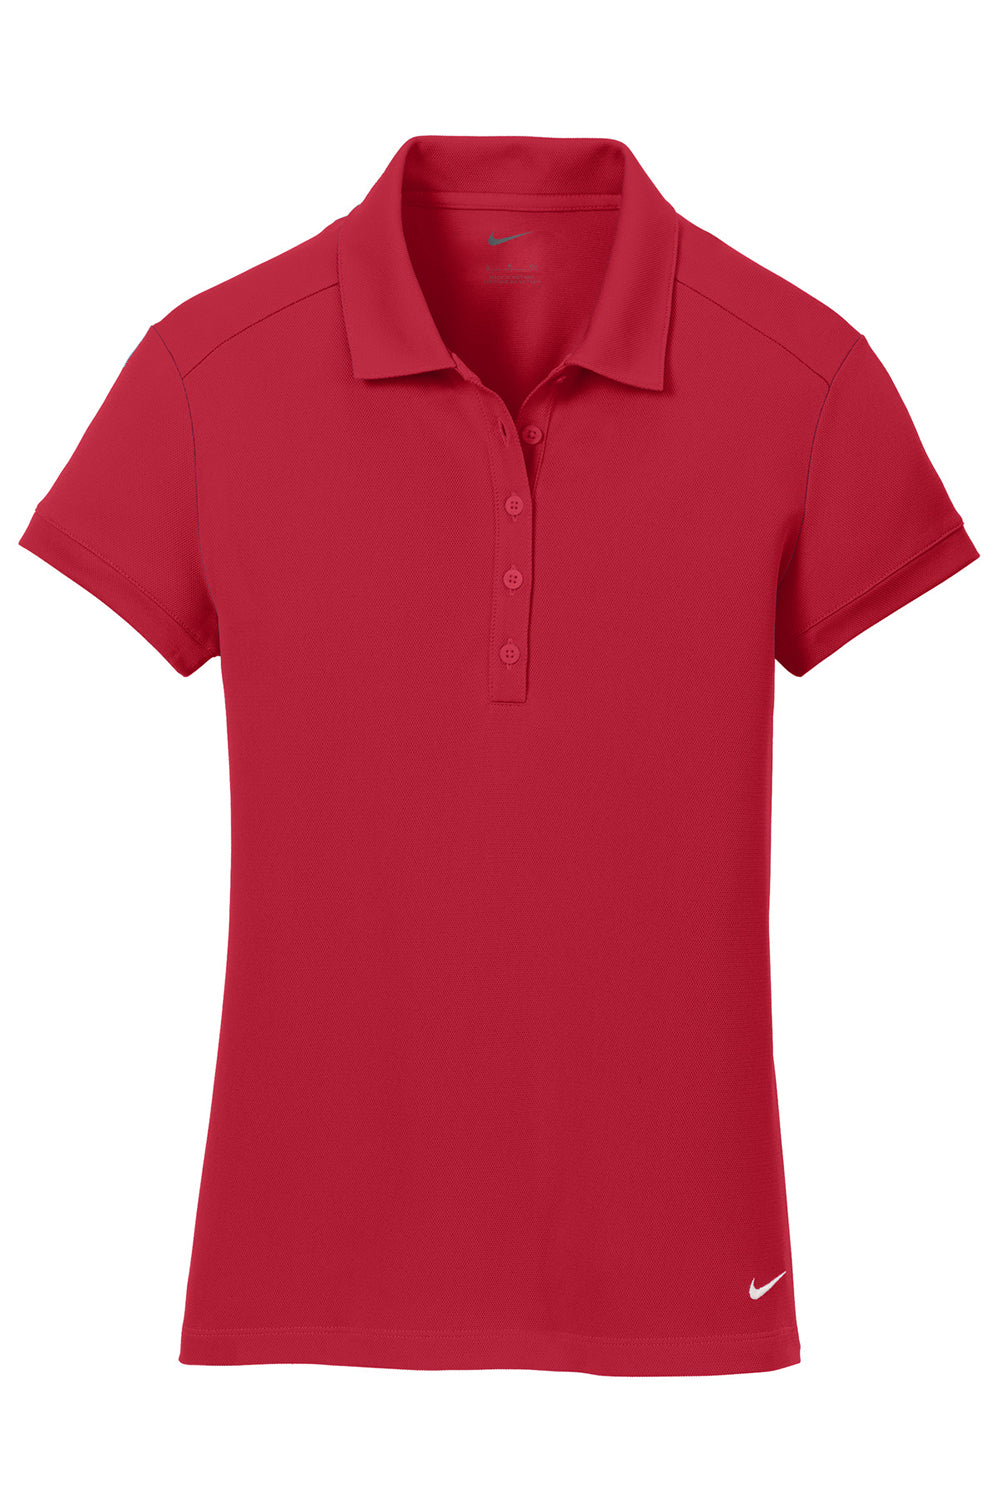 Nike 746100 Womens Icon Dri-Fit Moisture Wicking Short Sleeve Polo Shirt Gym Red Flat Front